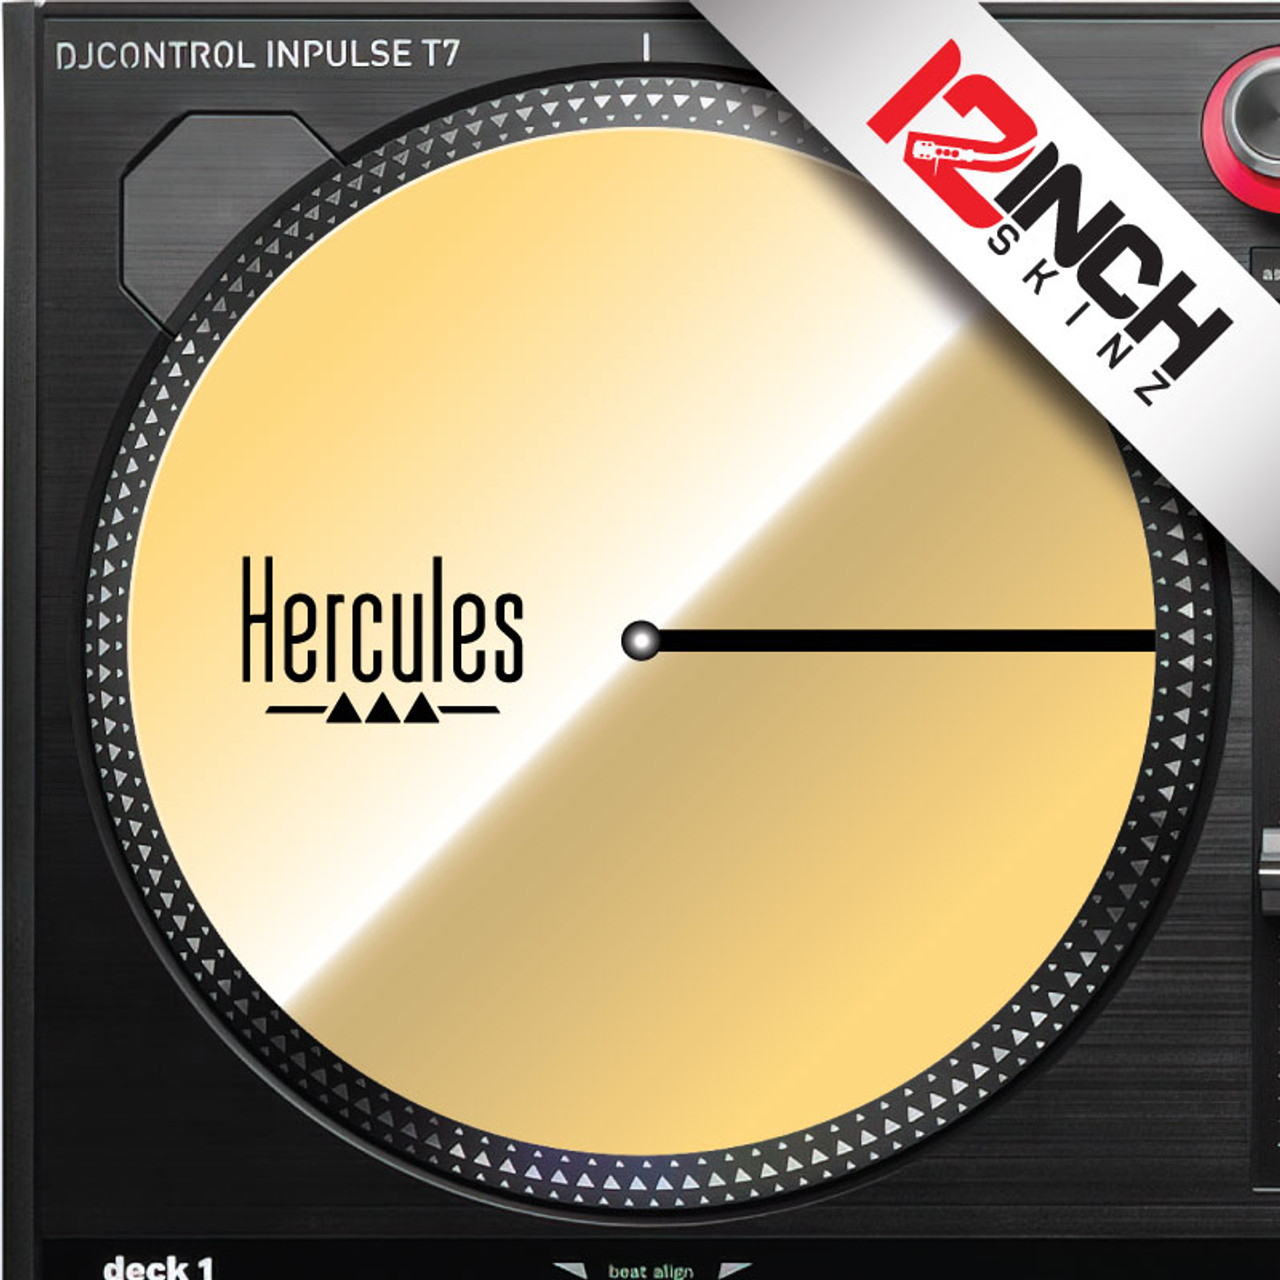 Hercules DJcontrol Inpulse T7 Review  Best DJ product of the year? 